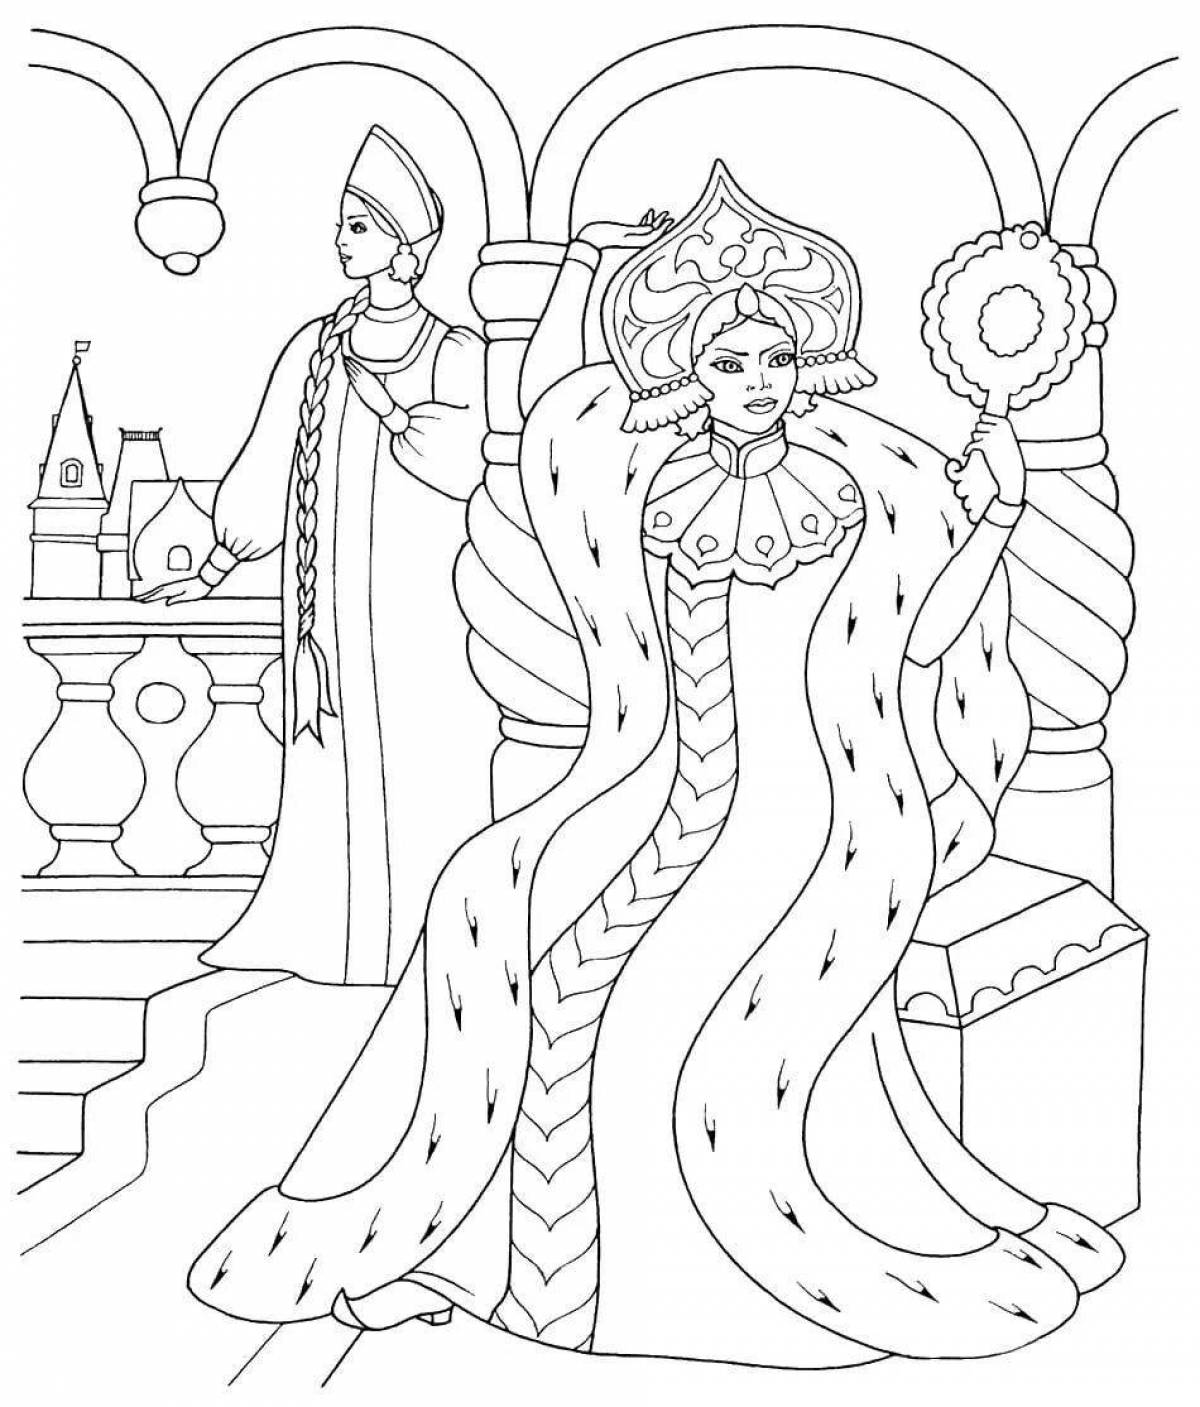 Glorious pillar noblewoman coloring page